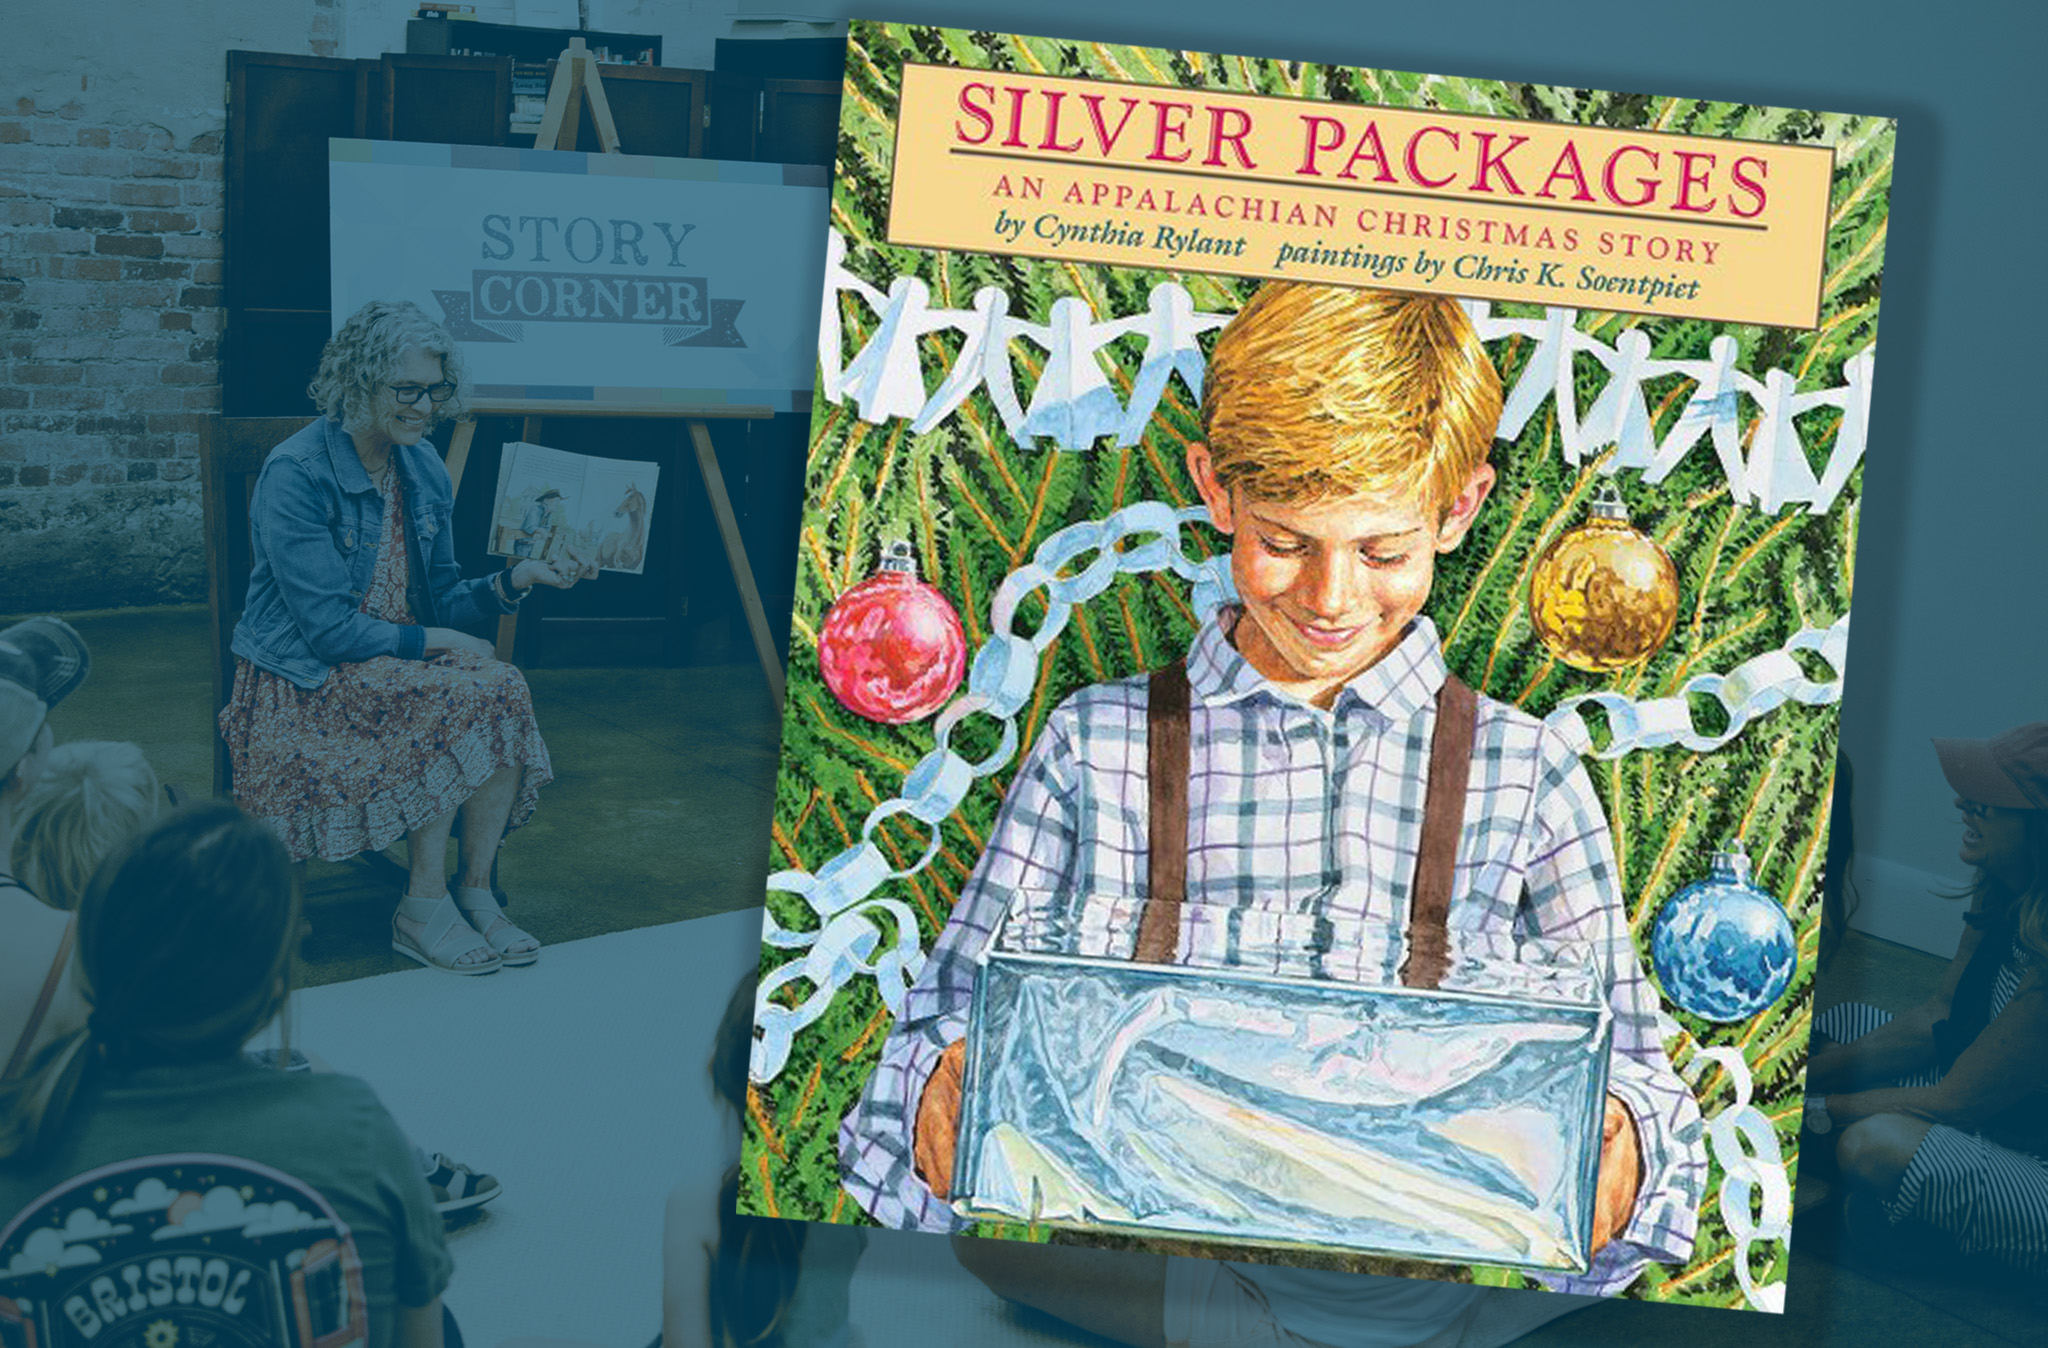 Graphic featuring the book cover of "Silver Packages: An Appalachian Christmas Story."